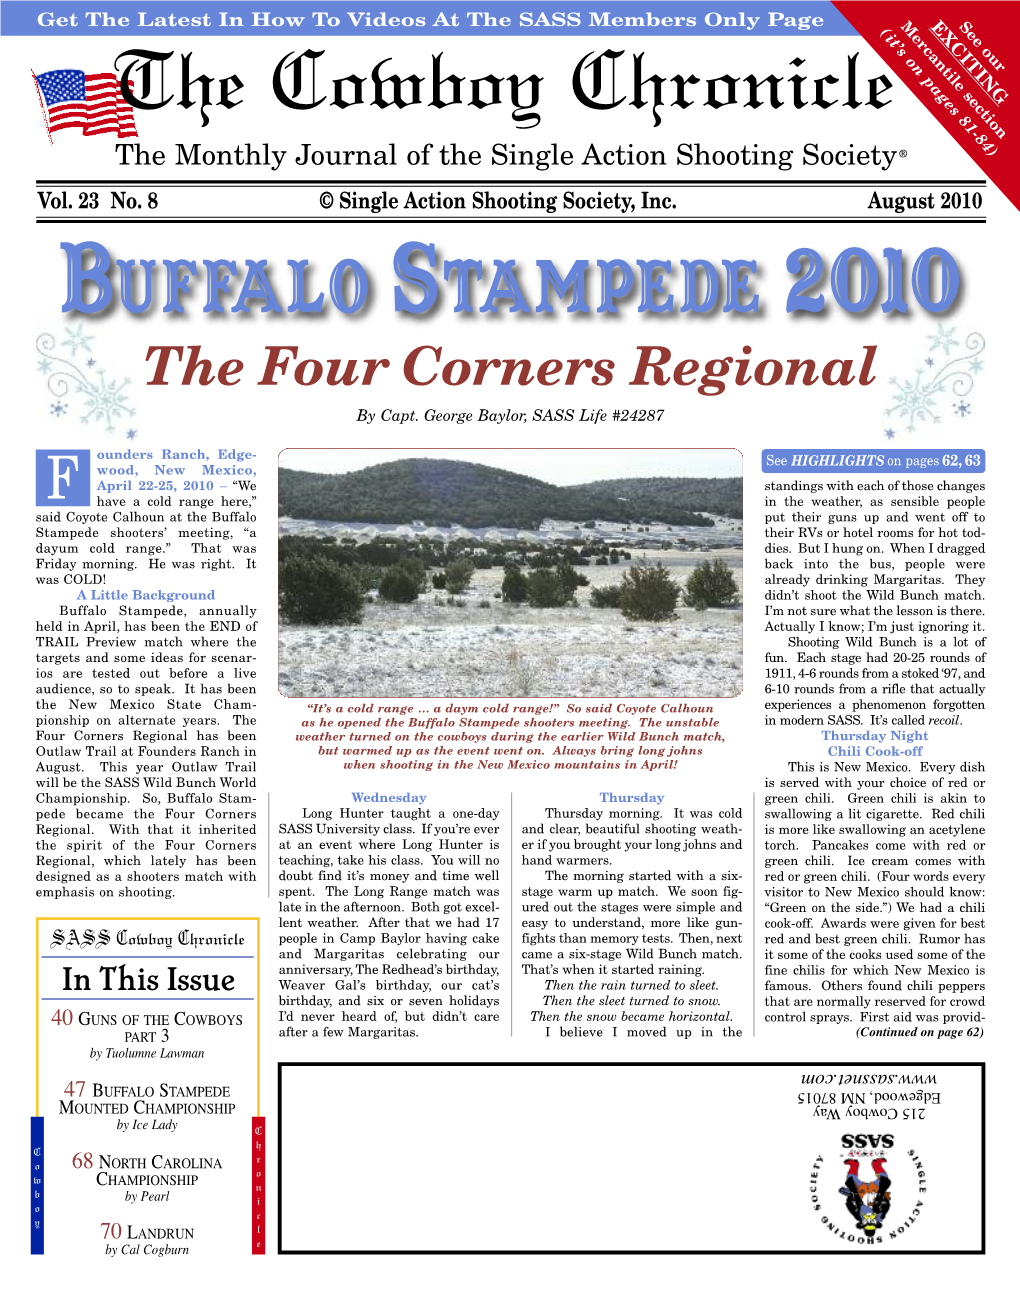 August 2010 Buffalo Stampede 2010 the Four Corners Regional by Capt